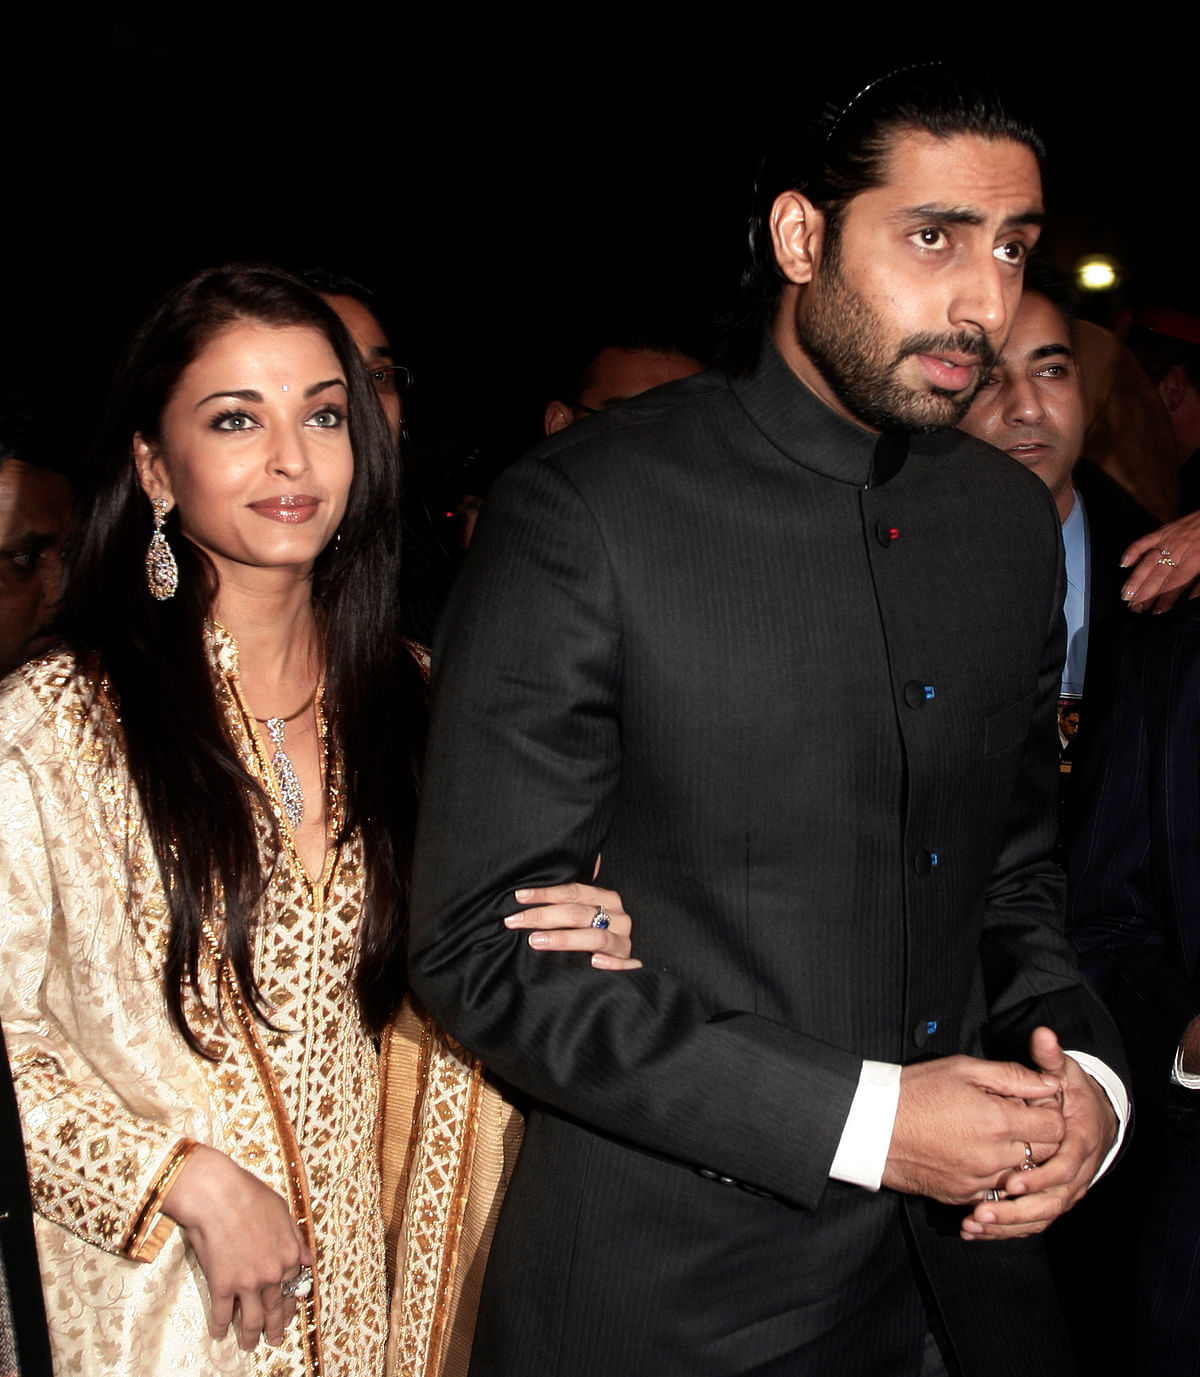 Abhishek & Aishwarya celebrate their 8th wedding anniversary today. Rewind to the films they did together